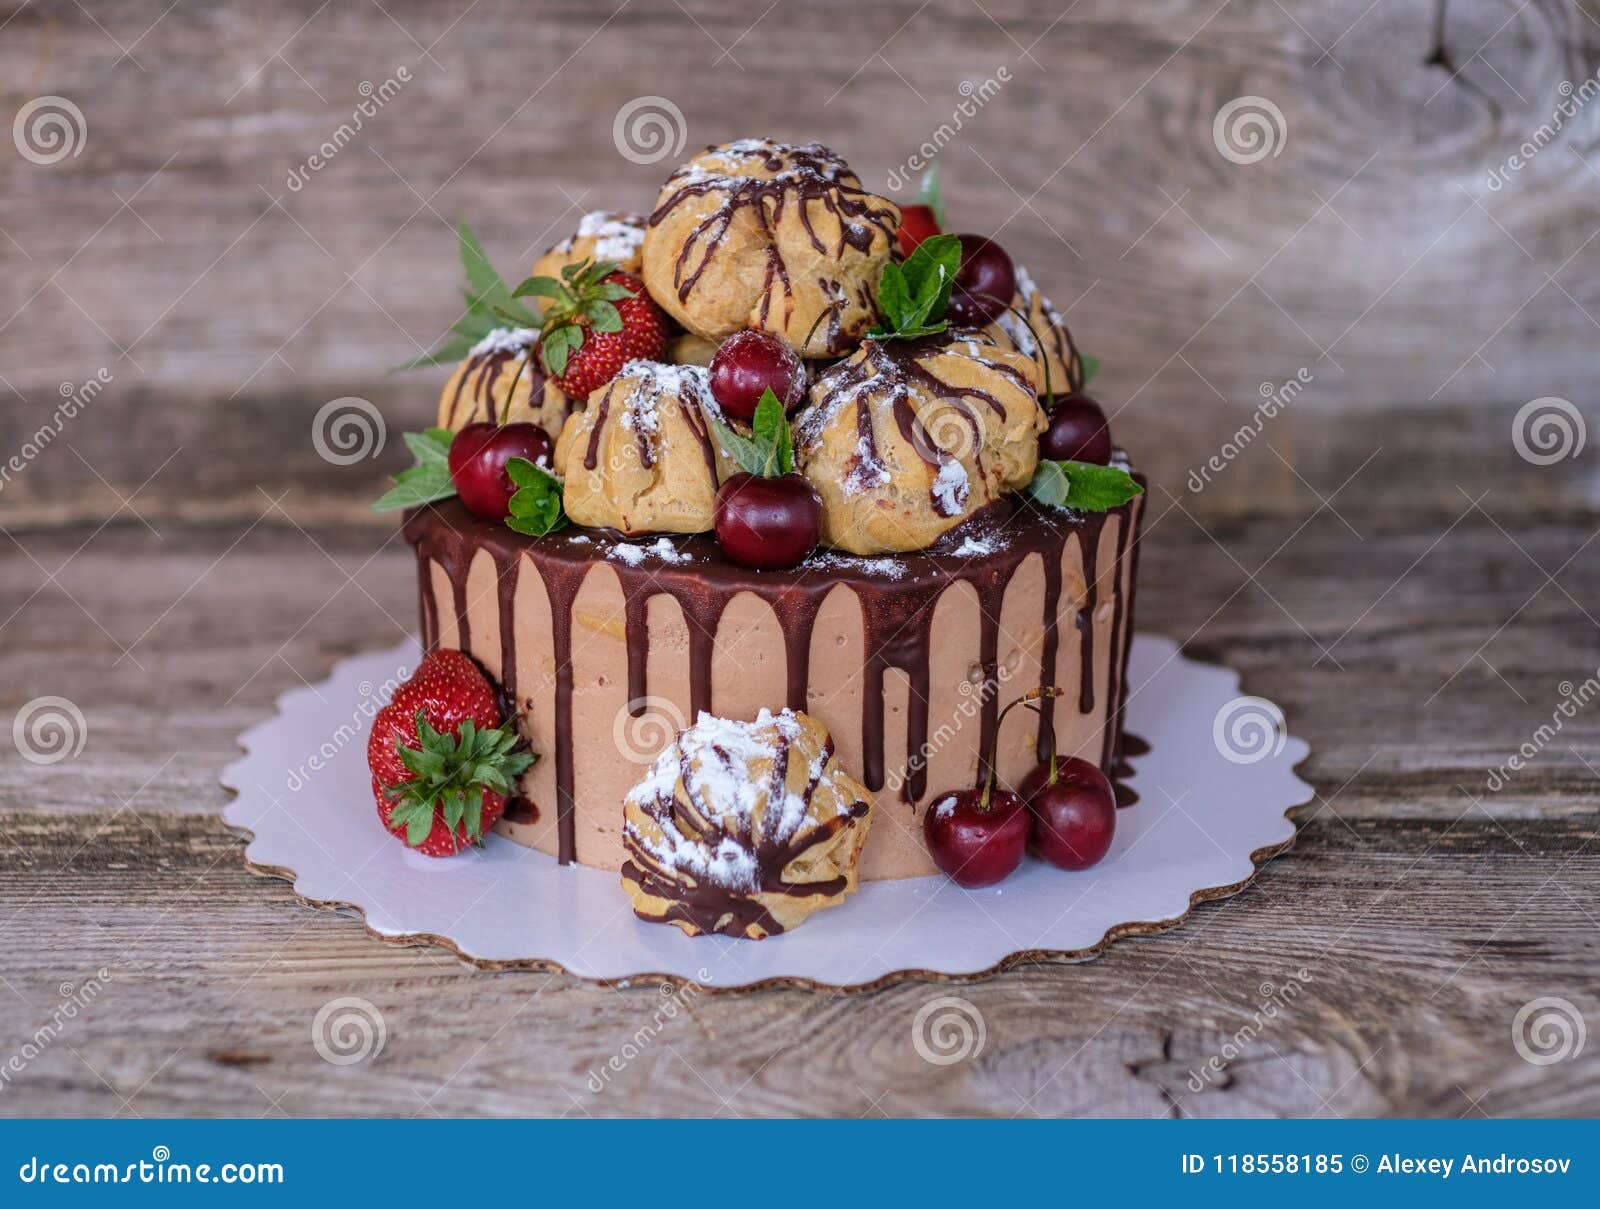 Homemade Profiterole Cake with Strawberries and Cherries Stock Image -  Image of flour, brown: 118558185